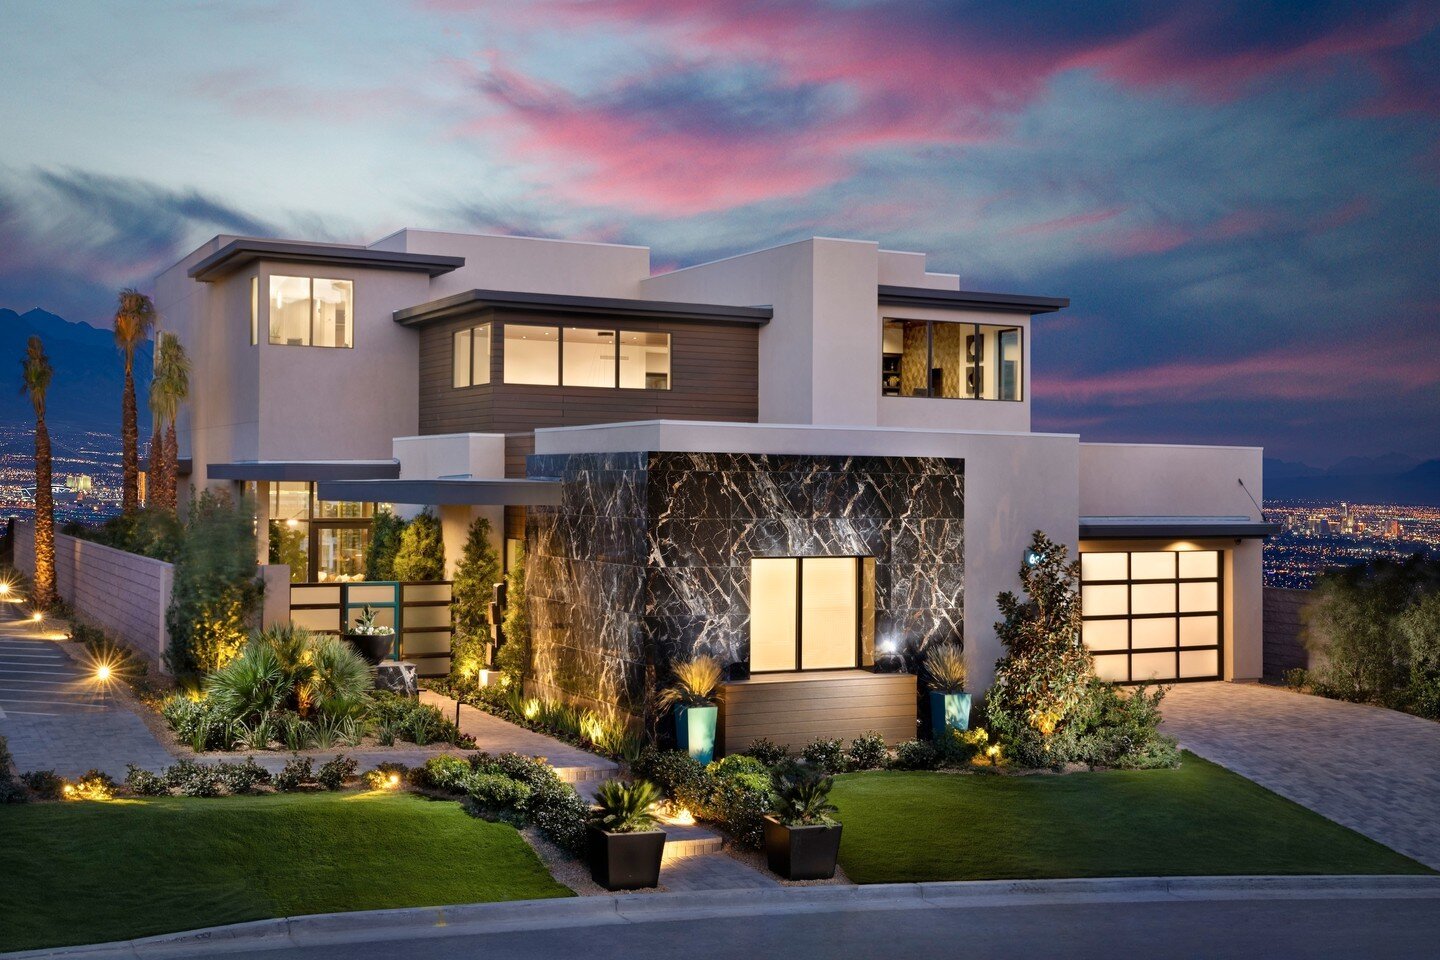 Viva Las Vegas! We're proud to welcome @christopherhomes, Southern Nevada&rsquo;s premier home builder revered for unparalleled quality with high-end luxury homes, and its new division @senecaliving with sophisticated rental homes, to our J. Lauren P